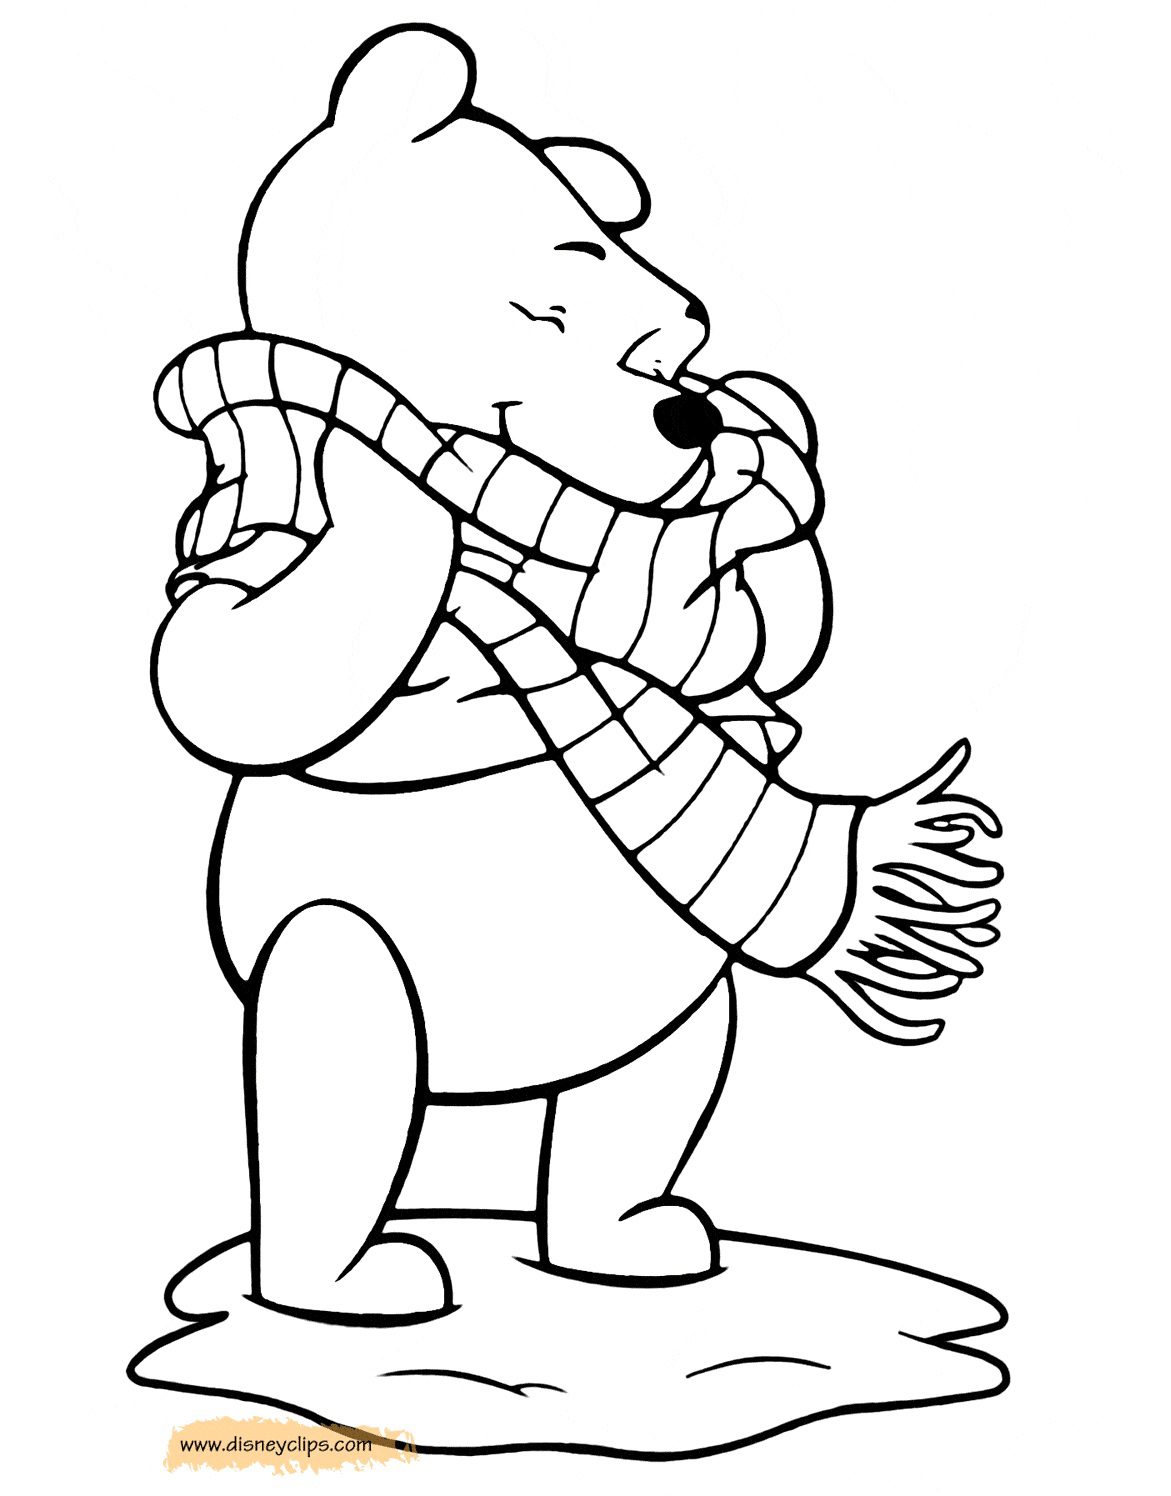 Coloring Pages Of Pooh Bear Winter